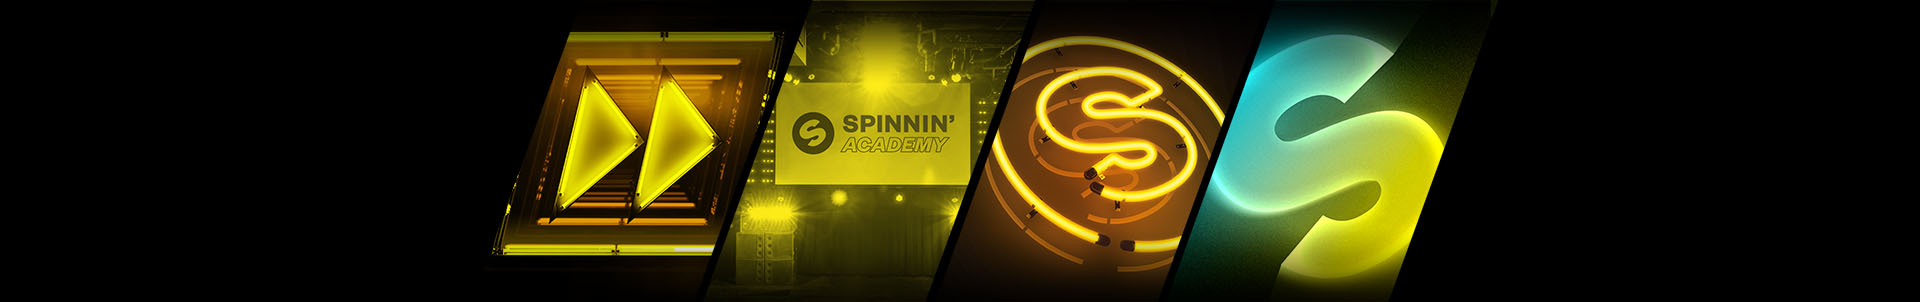 Spinnin' Records presents ADE programme